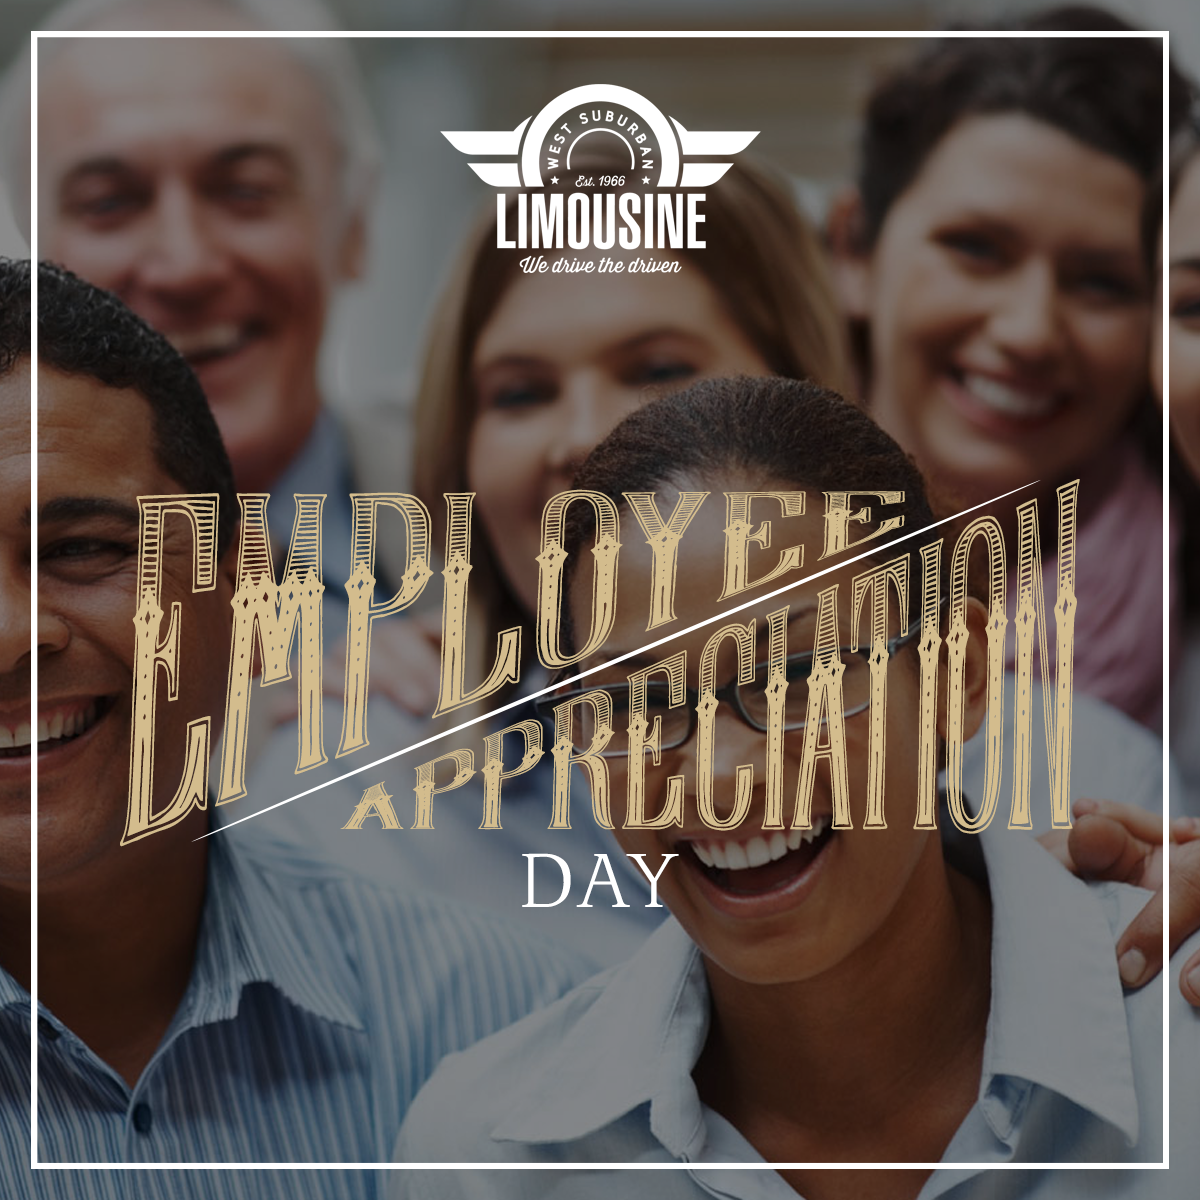 Employee Appreciation Day of 2019 at West Suburban Limousine